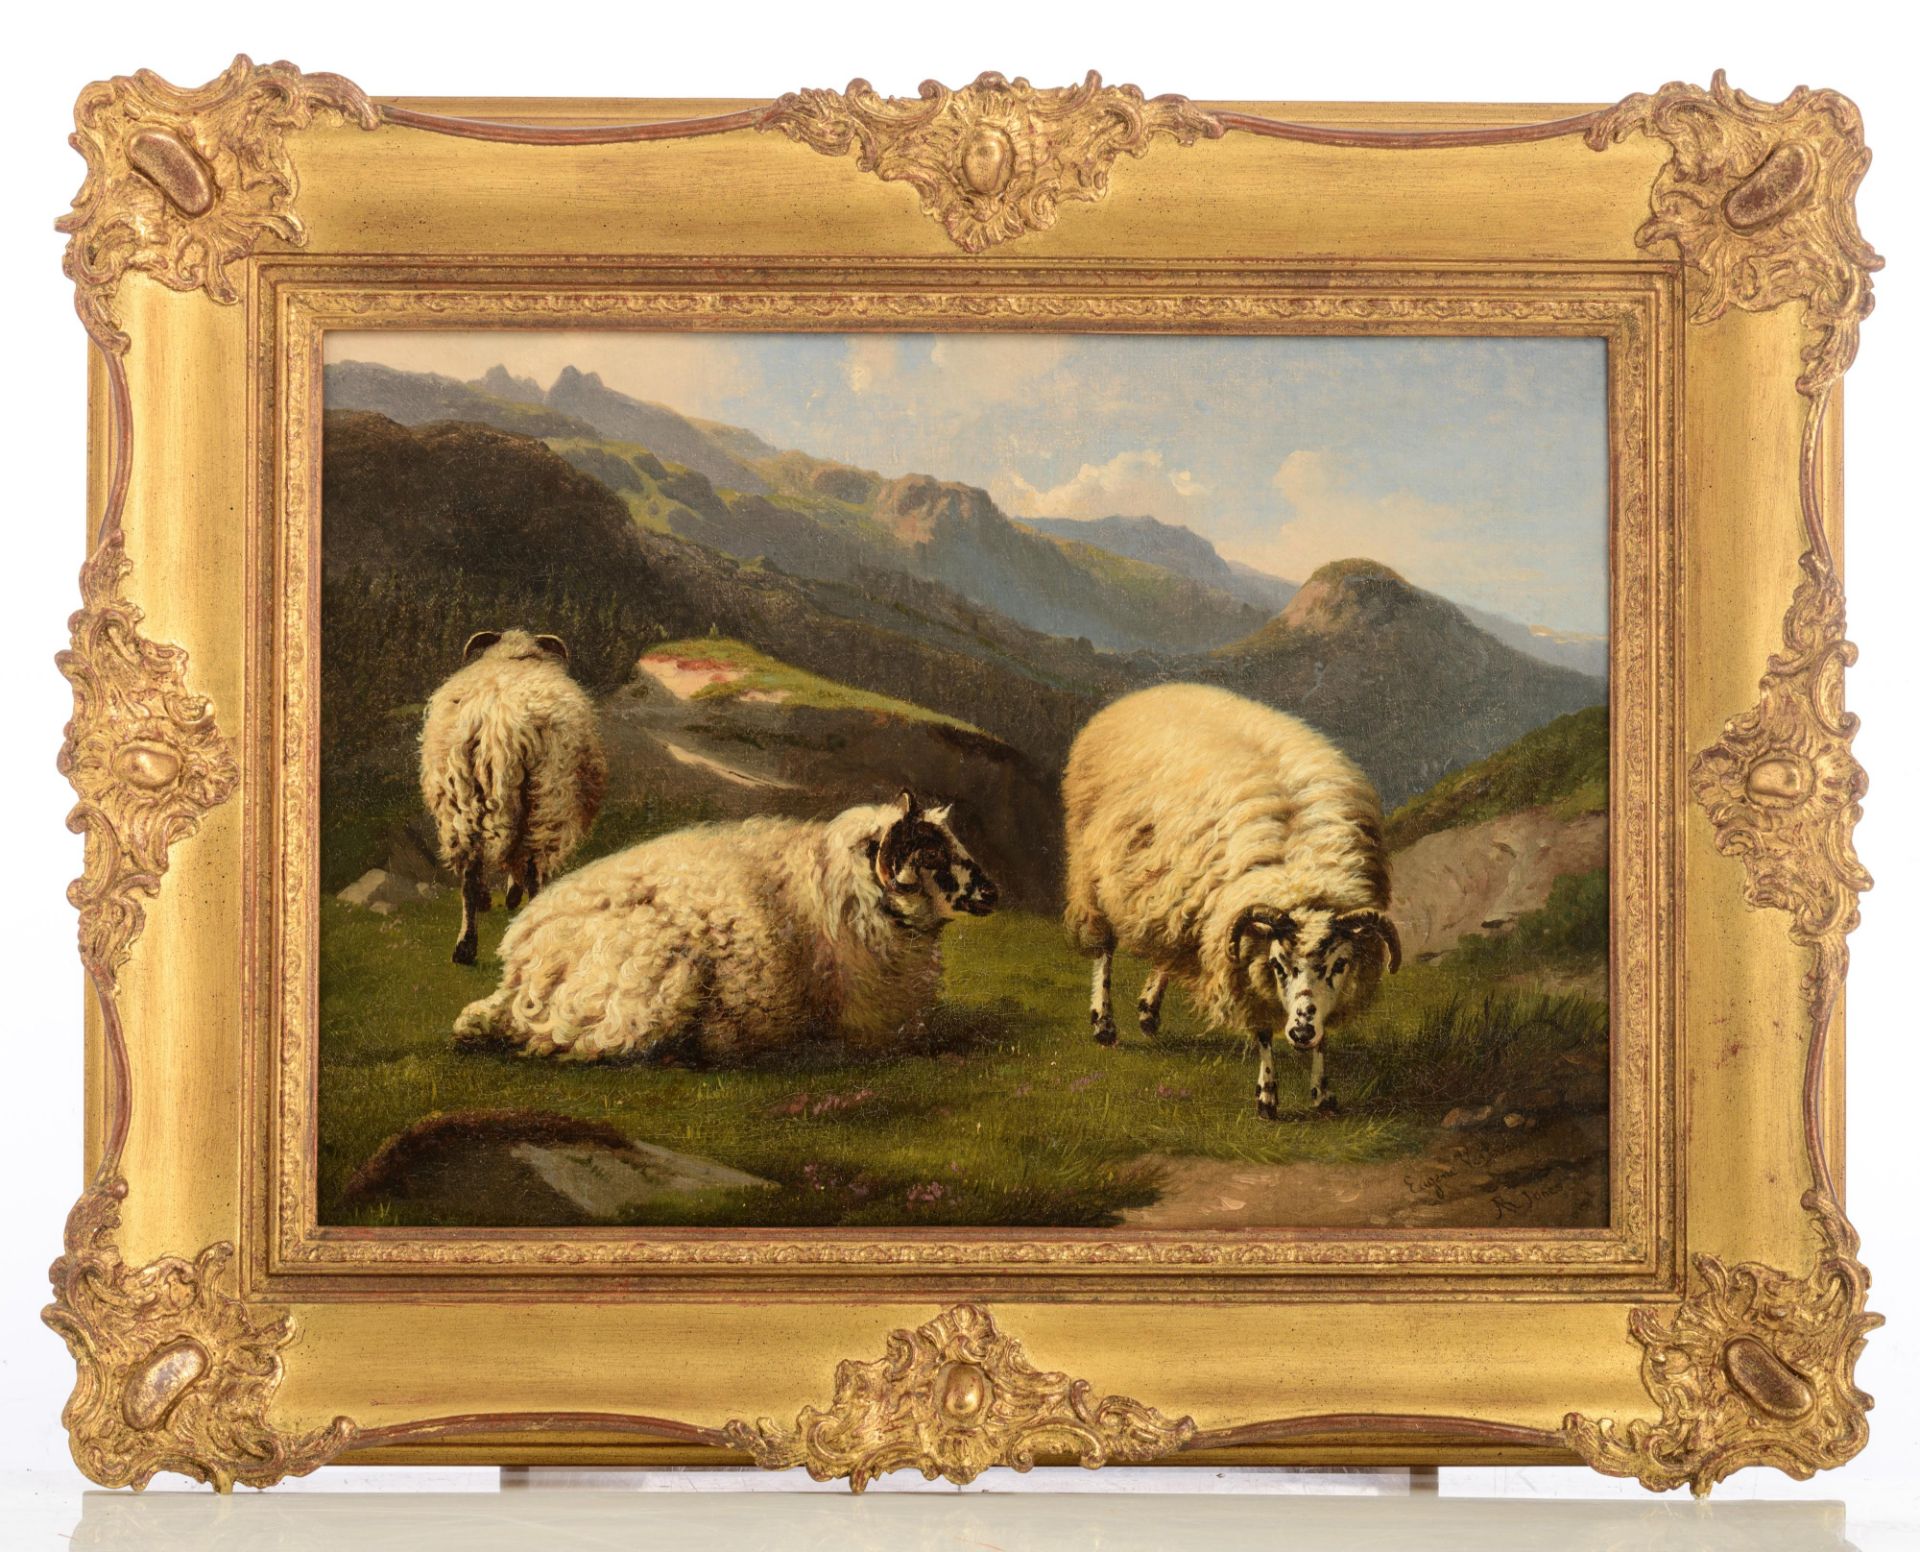 (Verboeckhoven E.) and Jones R., sheep in a mountainous landscape, oil on canvas, 39,5 x 56,5 cm - Image 3 of 8